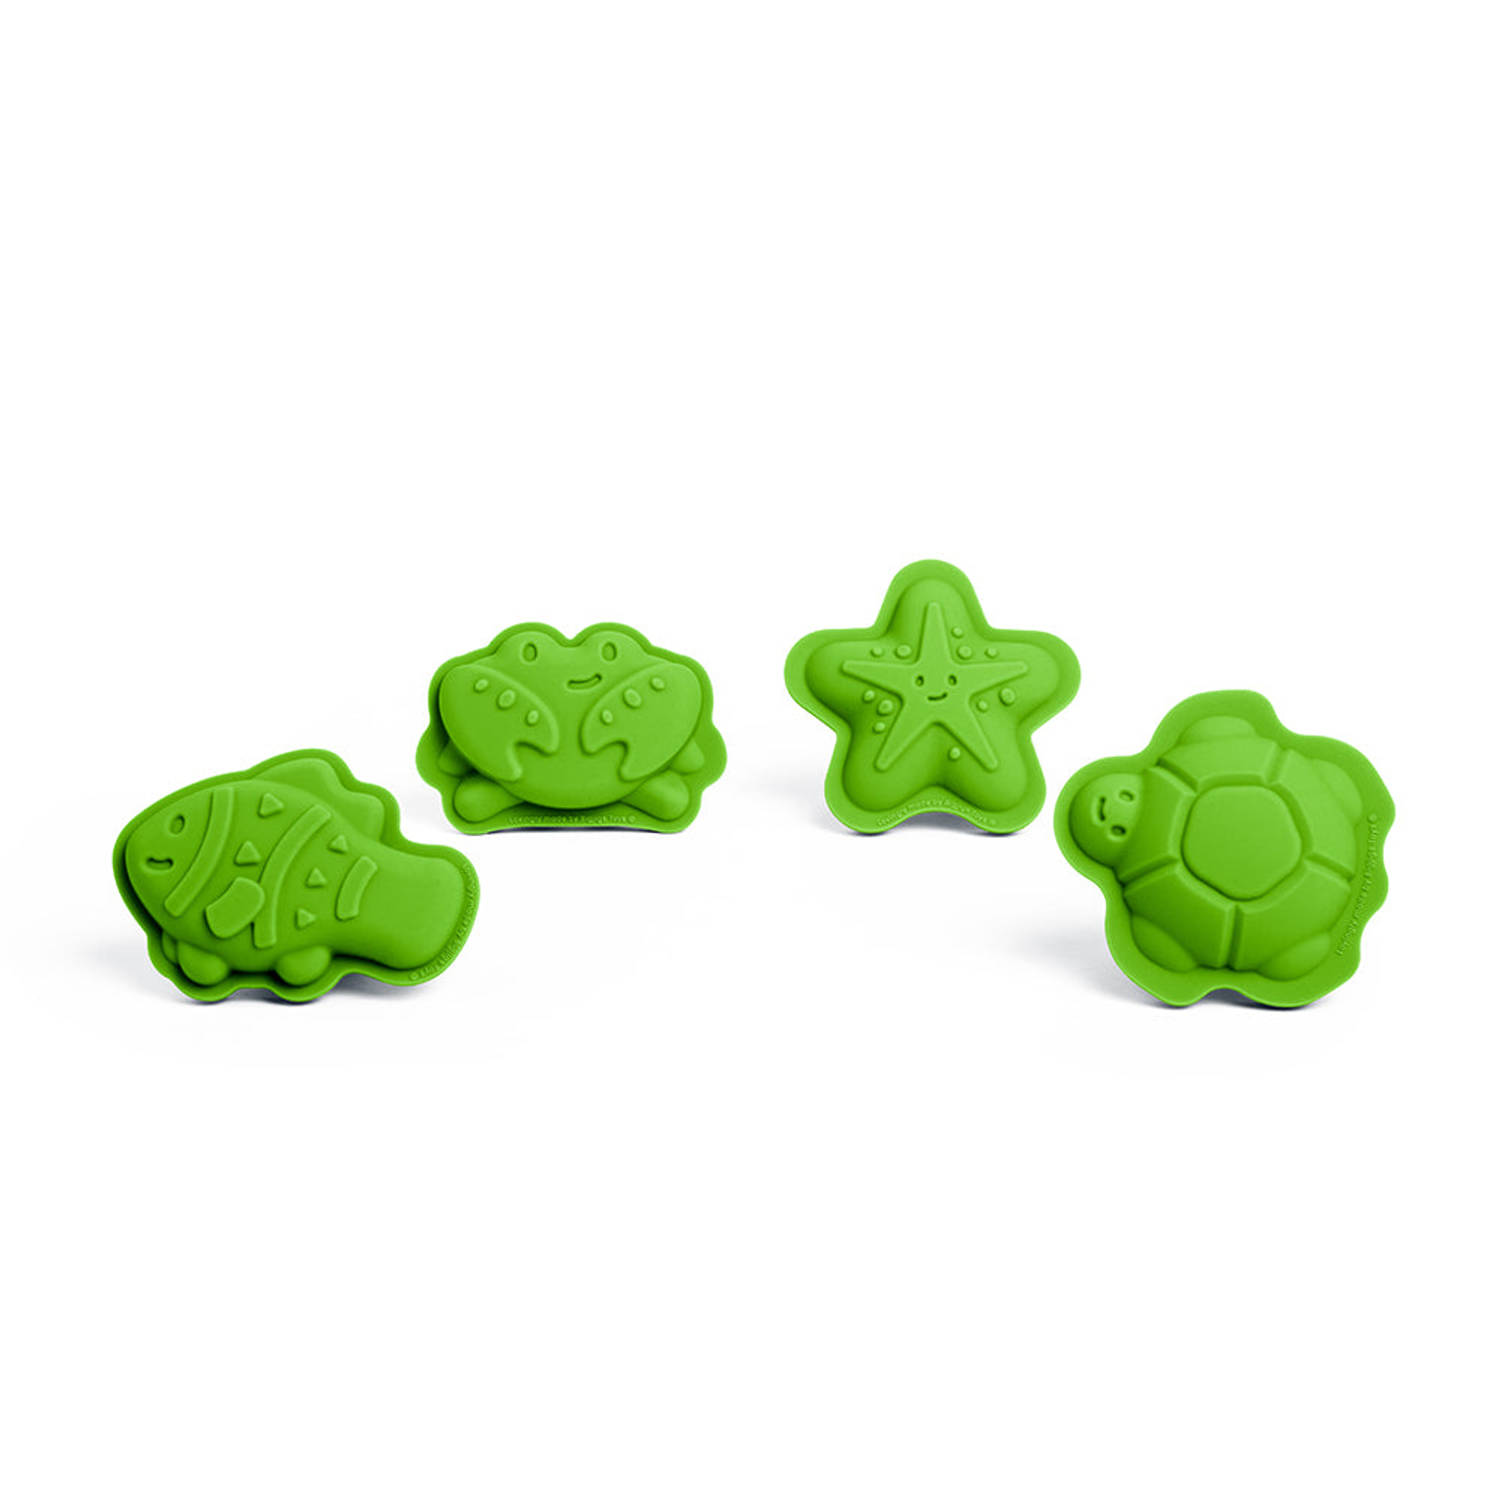 Bigjigs Meadow Green Character Sand Moulds